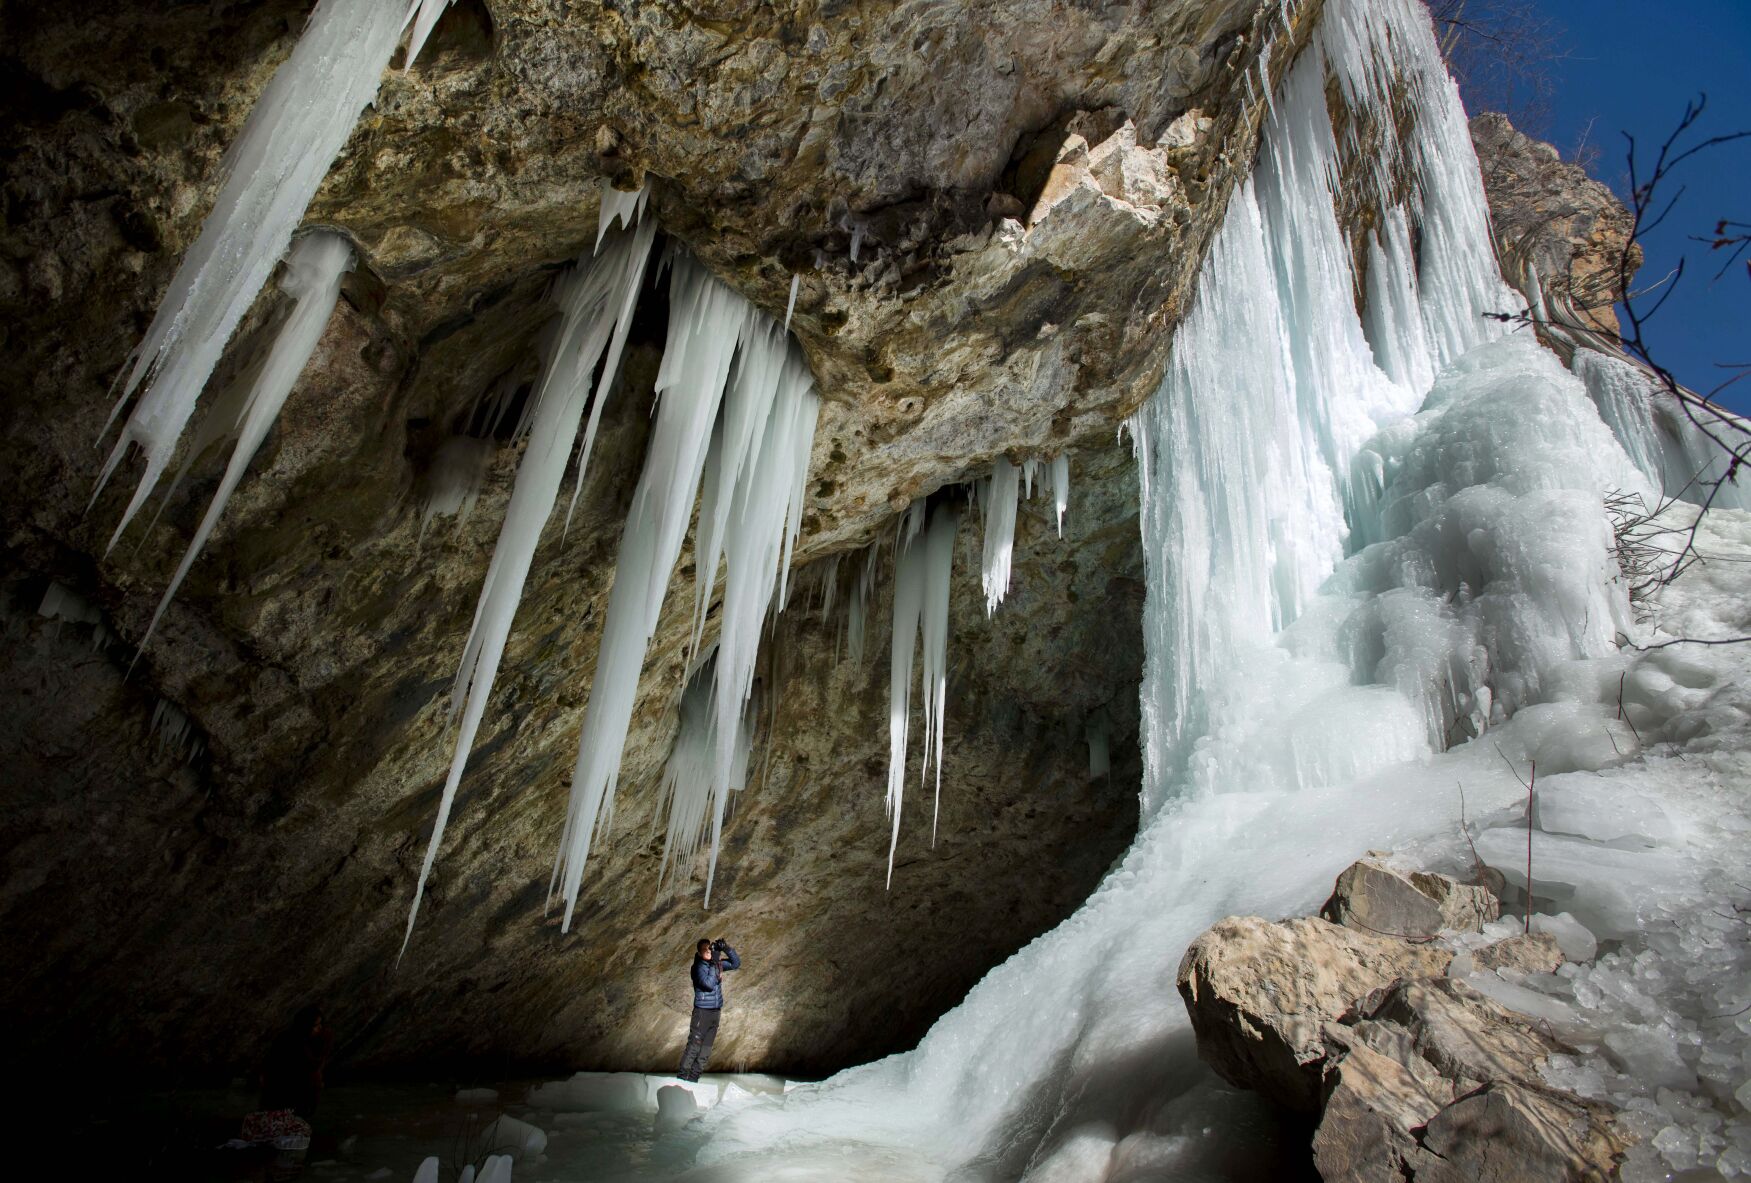 Frozen phenoms: The marvelous ice caves of western Colorado